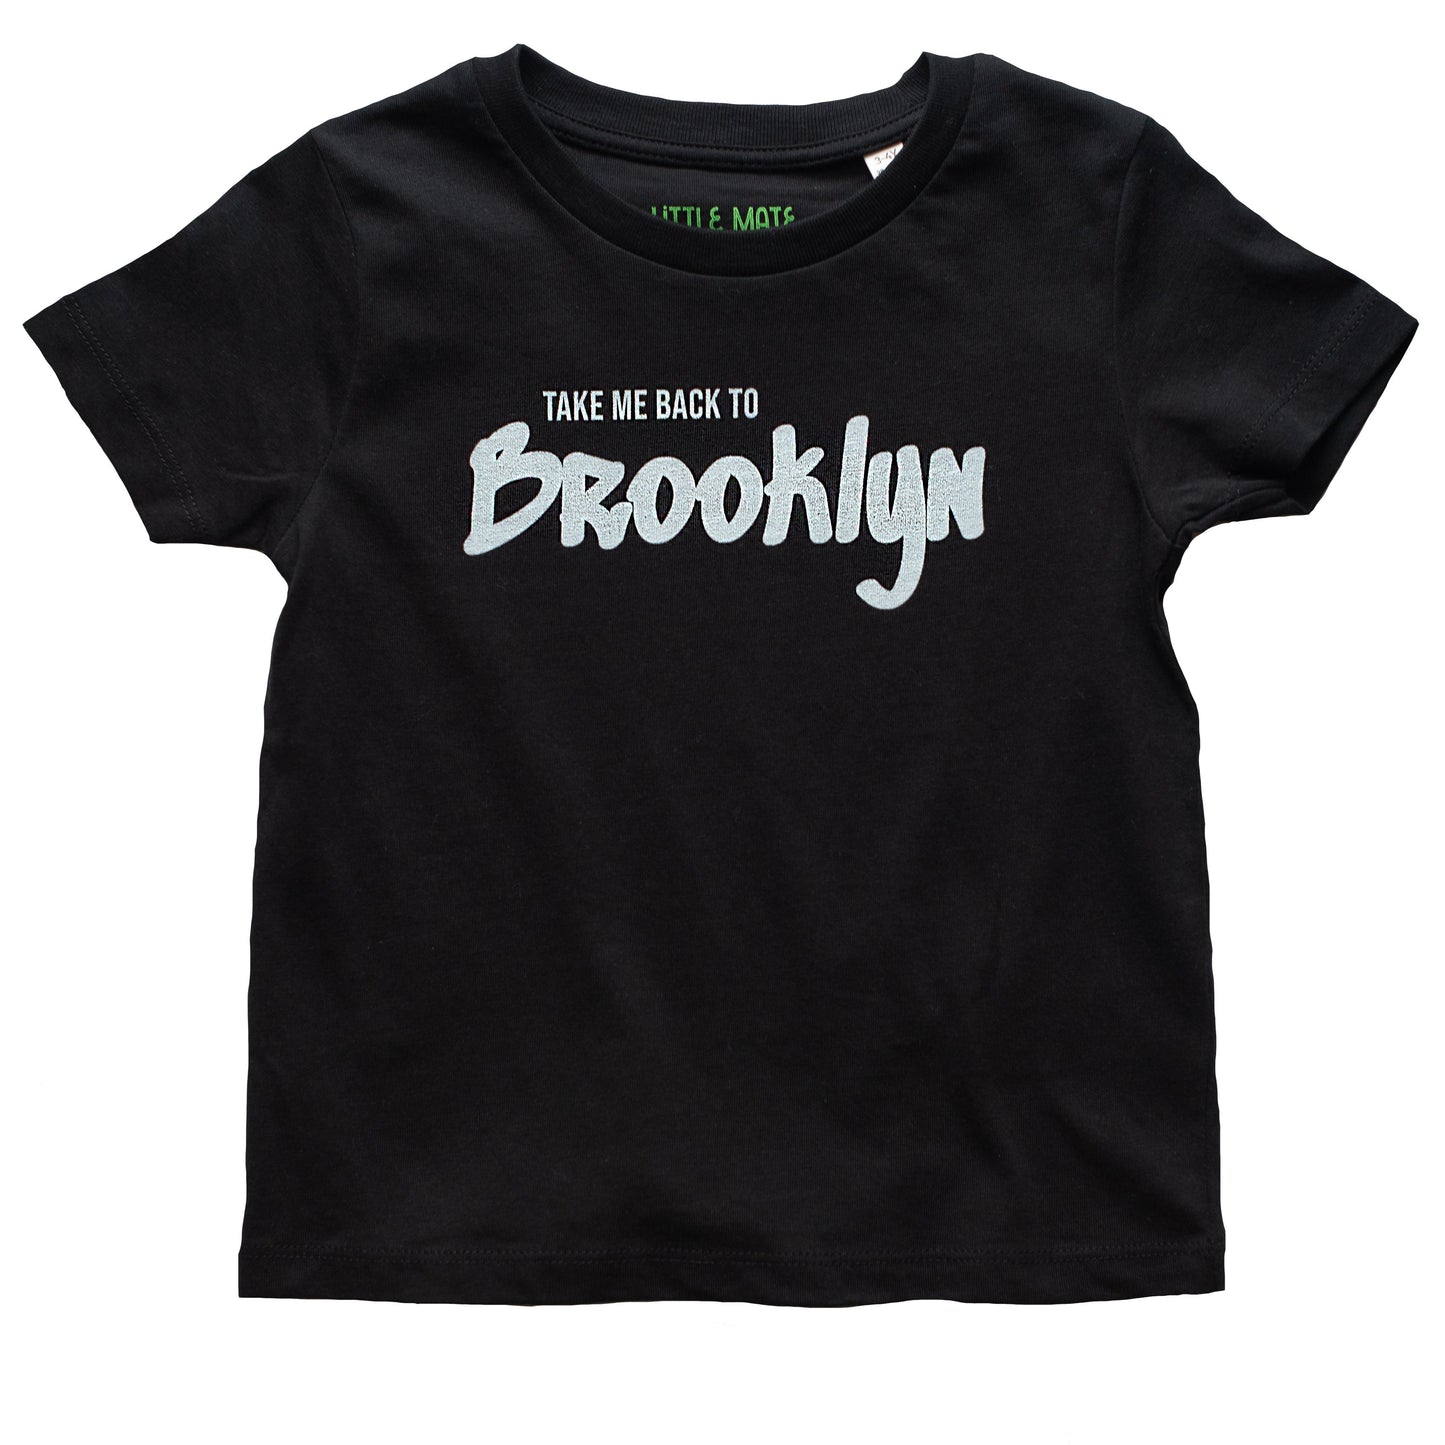 TAKE ME BACK TO BROOKLYN - Toddler and Youth T-Shirt - Little Mate Adventures